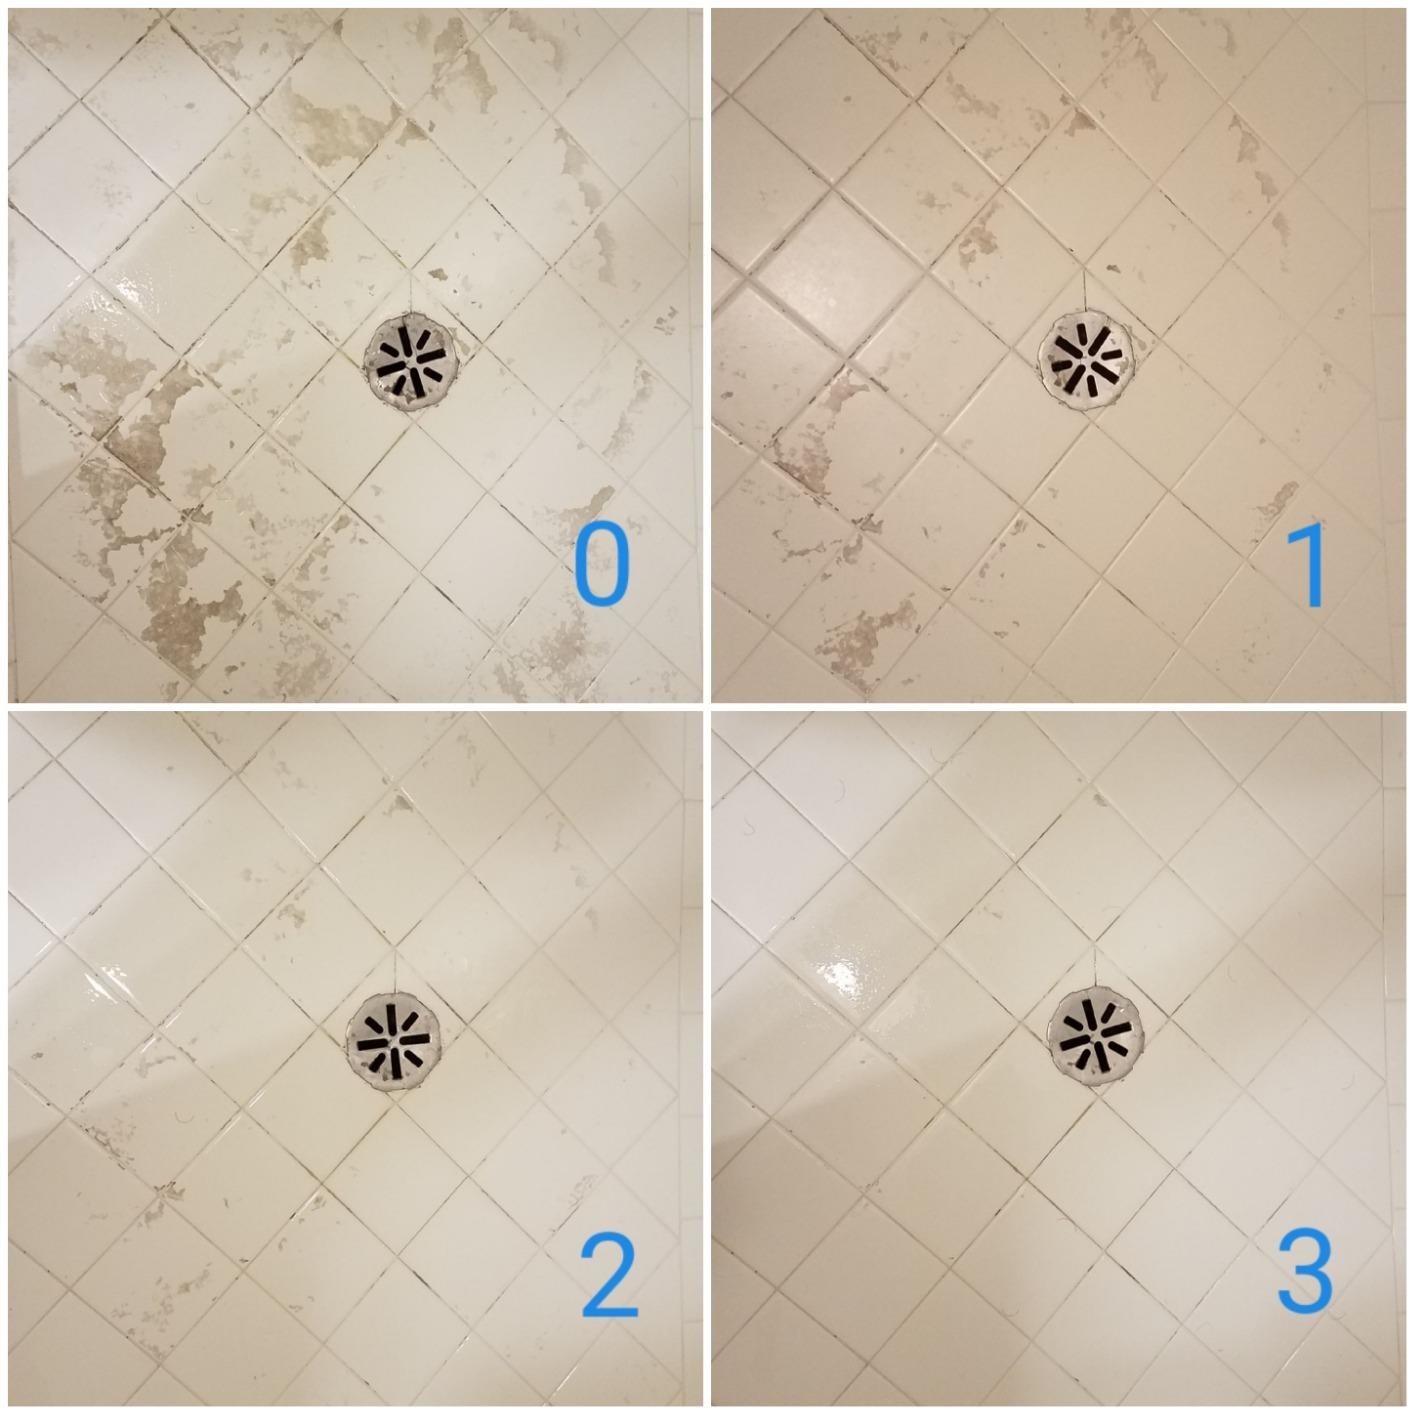 From top left to bottom right: gradual fading of grimy shower drain stains after using the spray